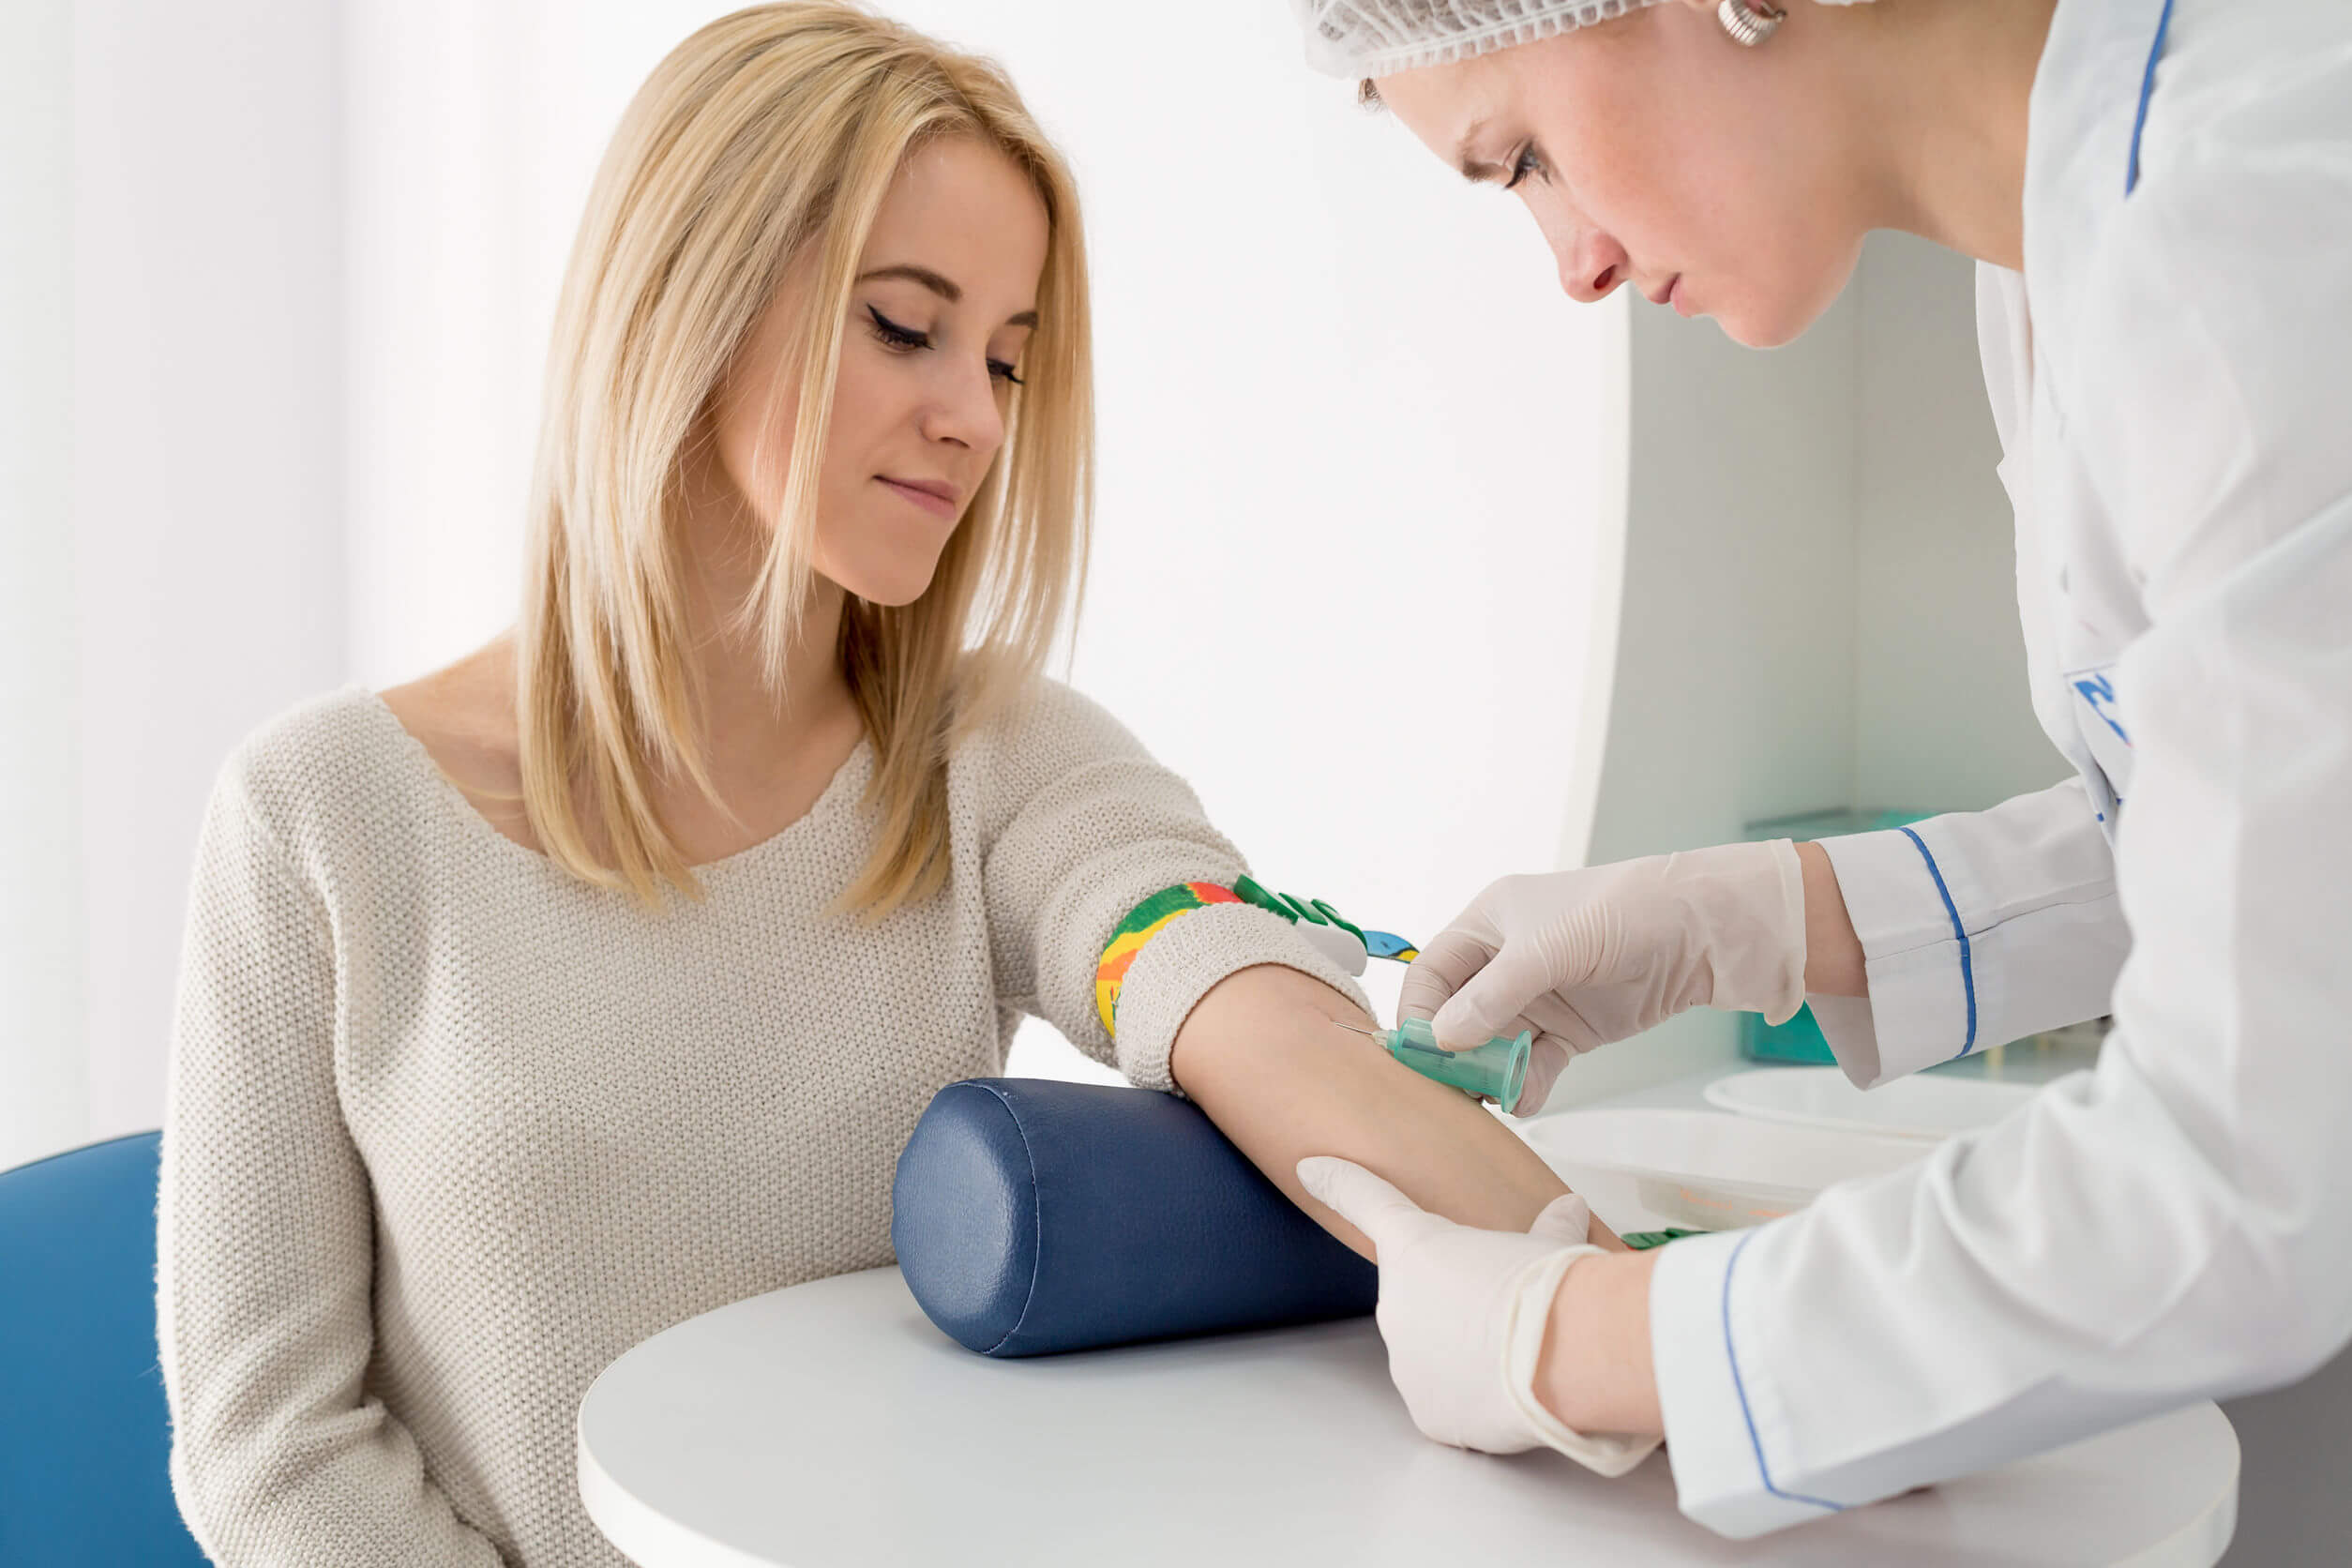 The blood test must be performed by professionals in clinical analysis.